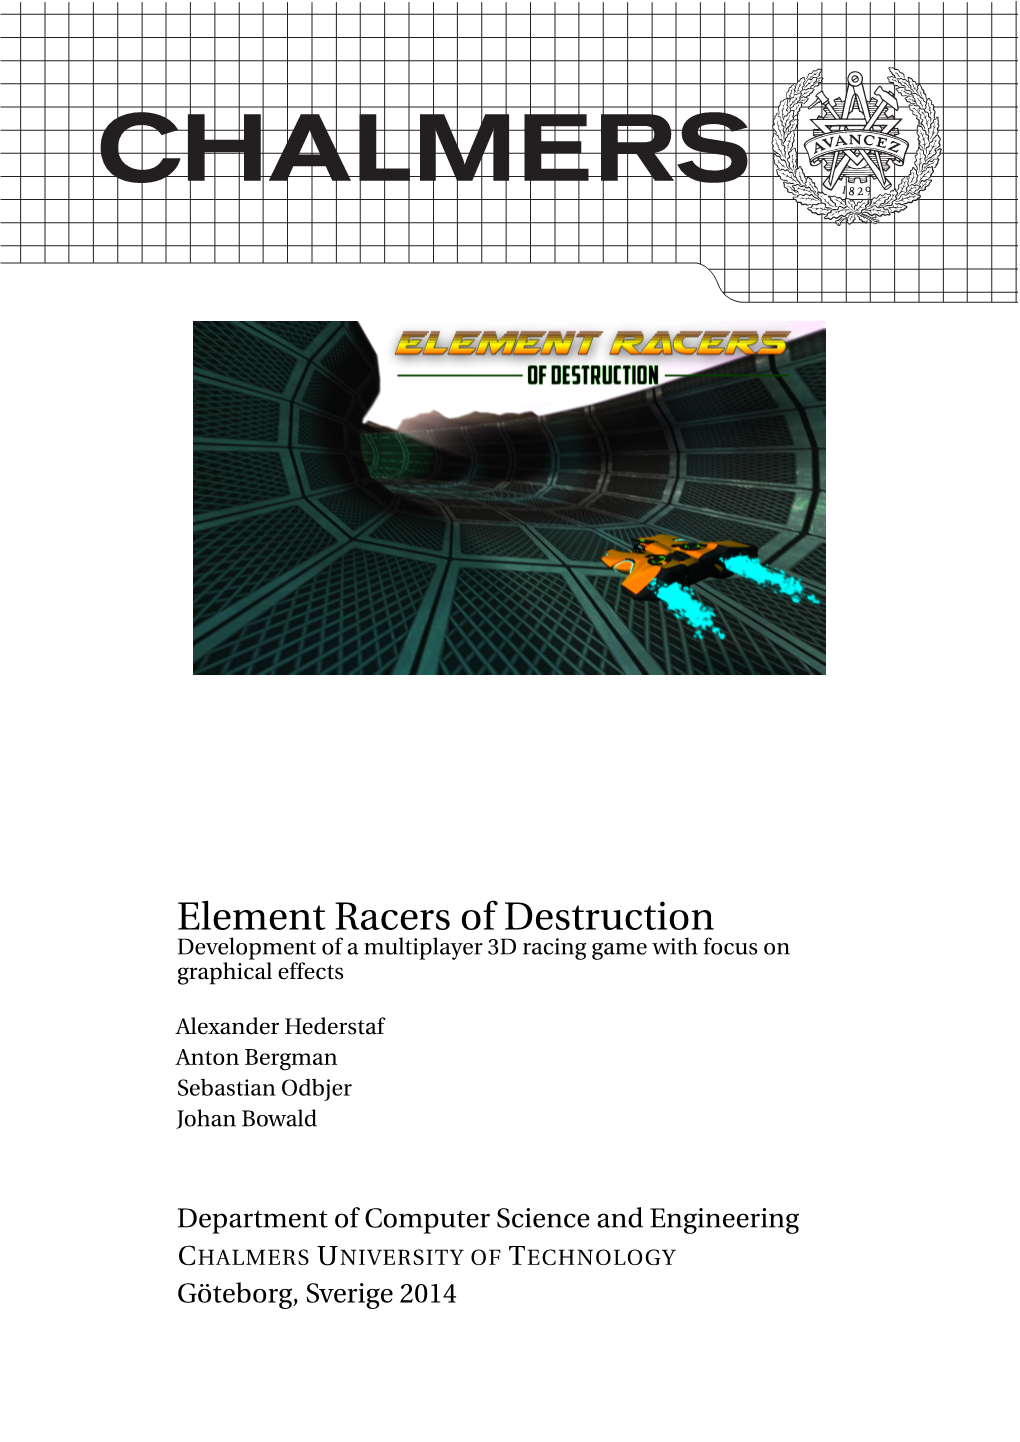 Element Racers of Destruction Development of a Multiplayer 3D Racing Game with Focus on Graphical Effects